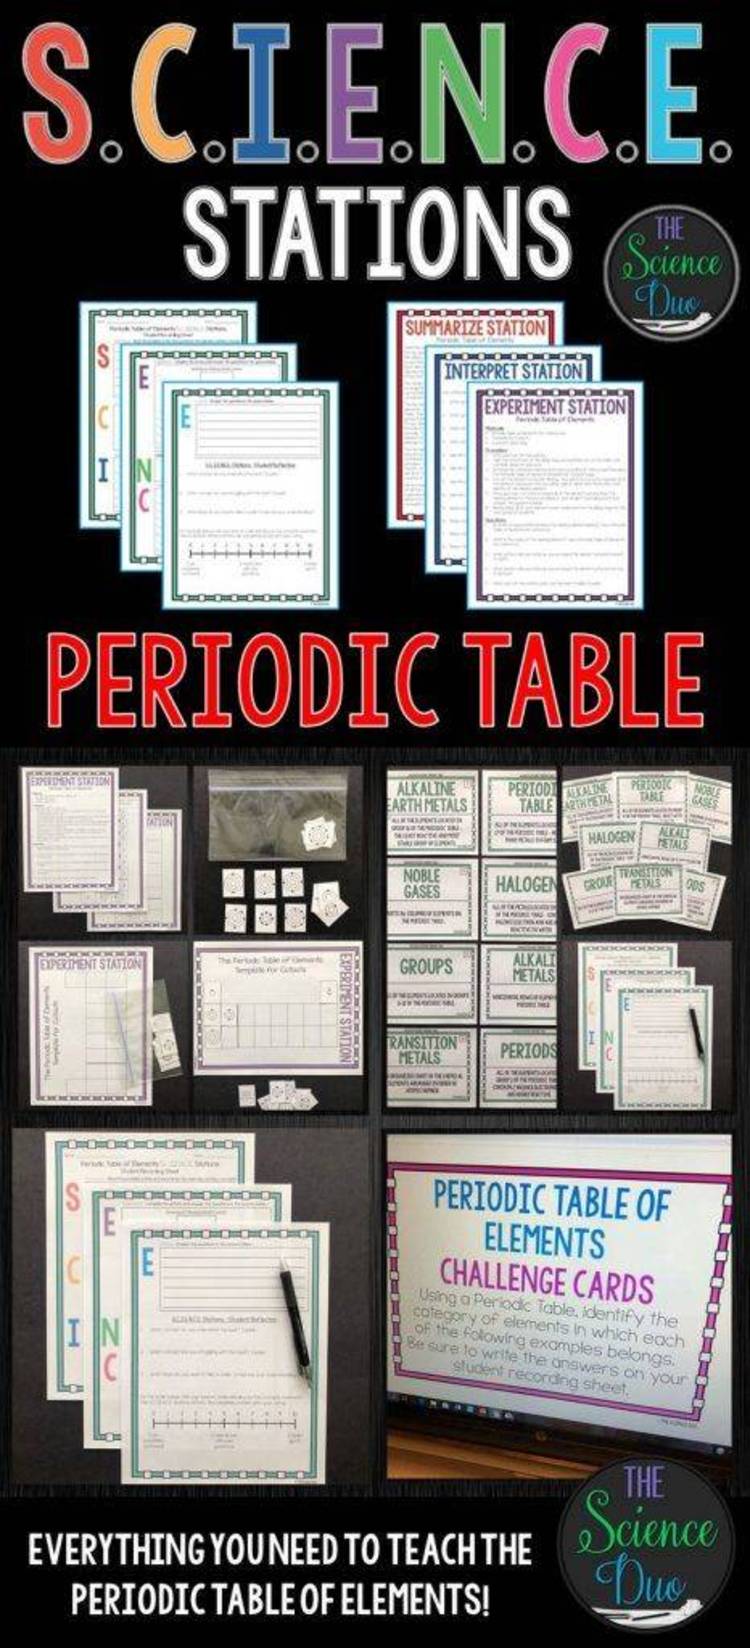 Pop-up periodic table, very useful for chemistry students.